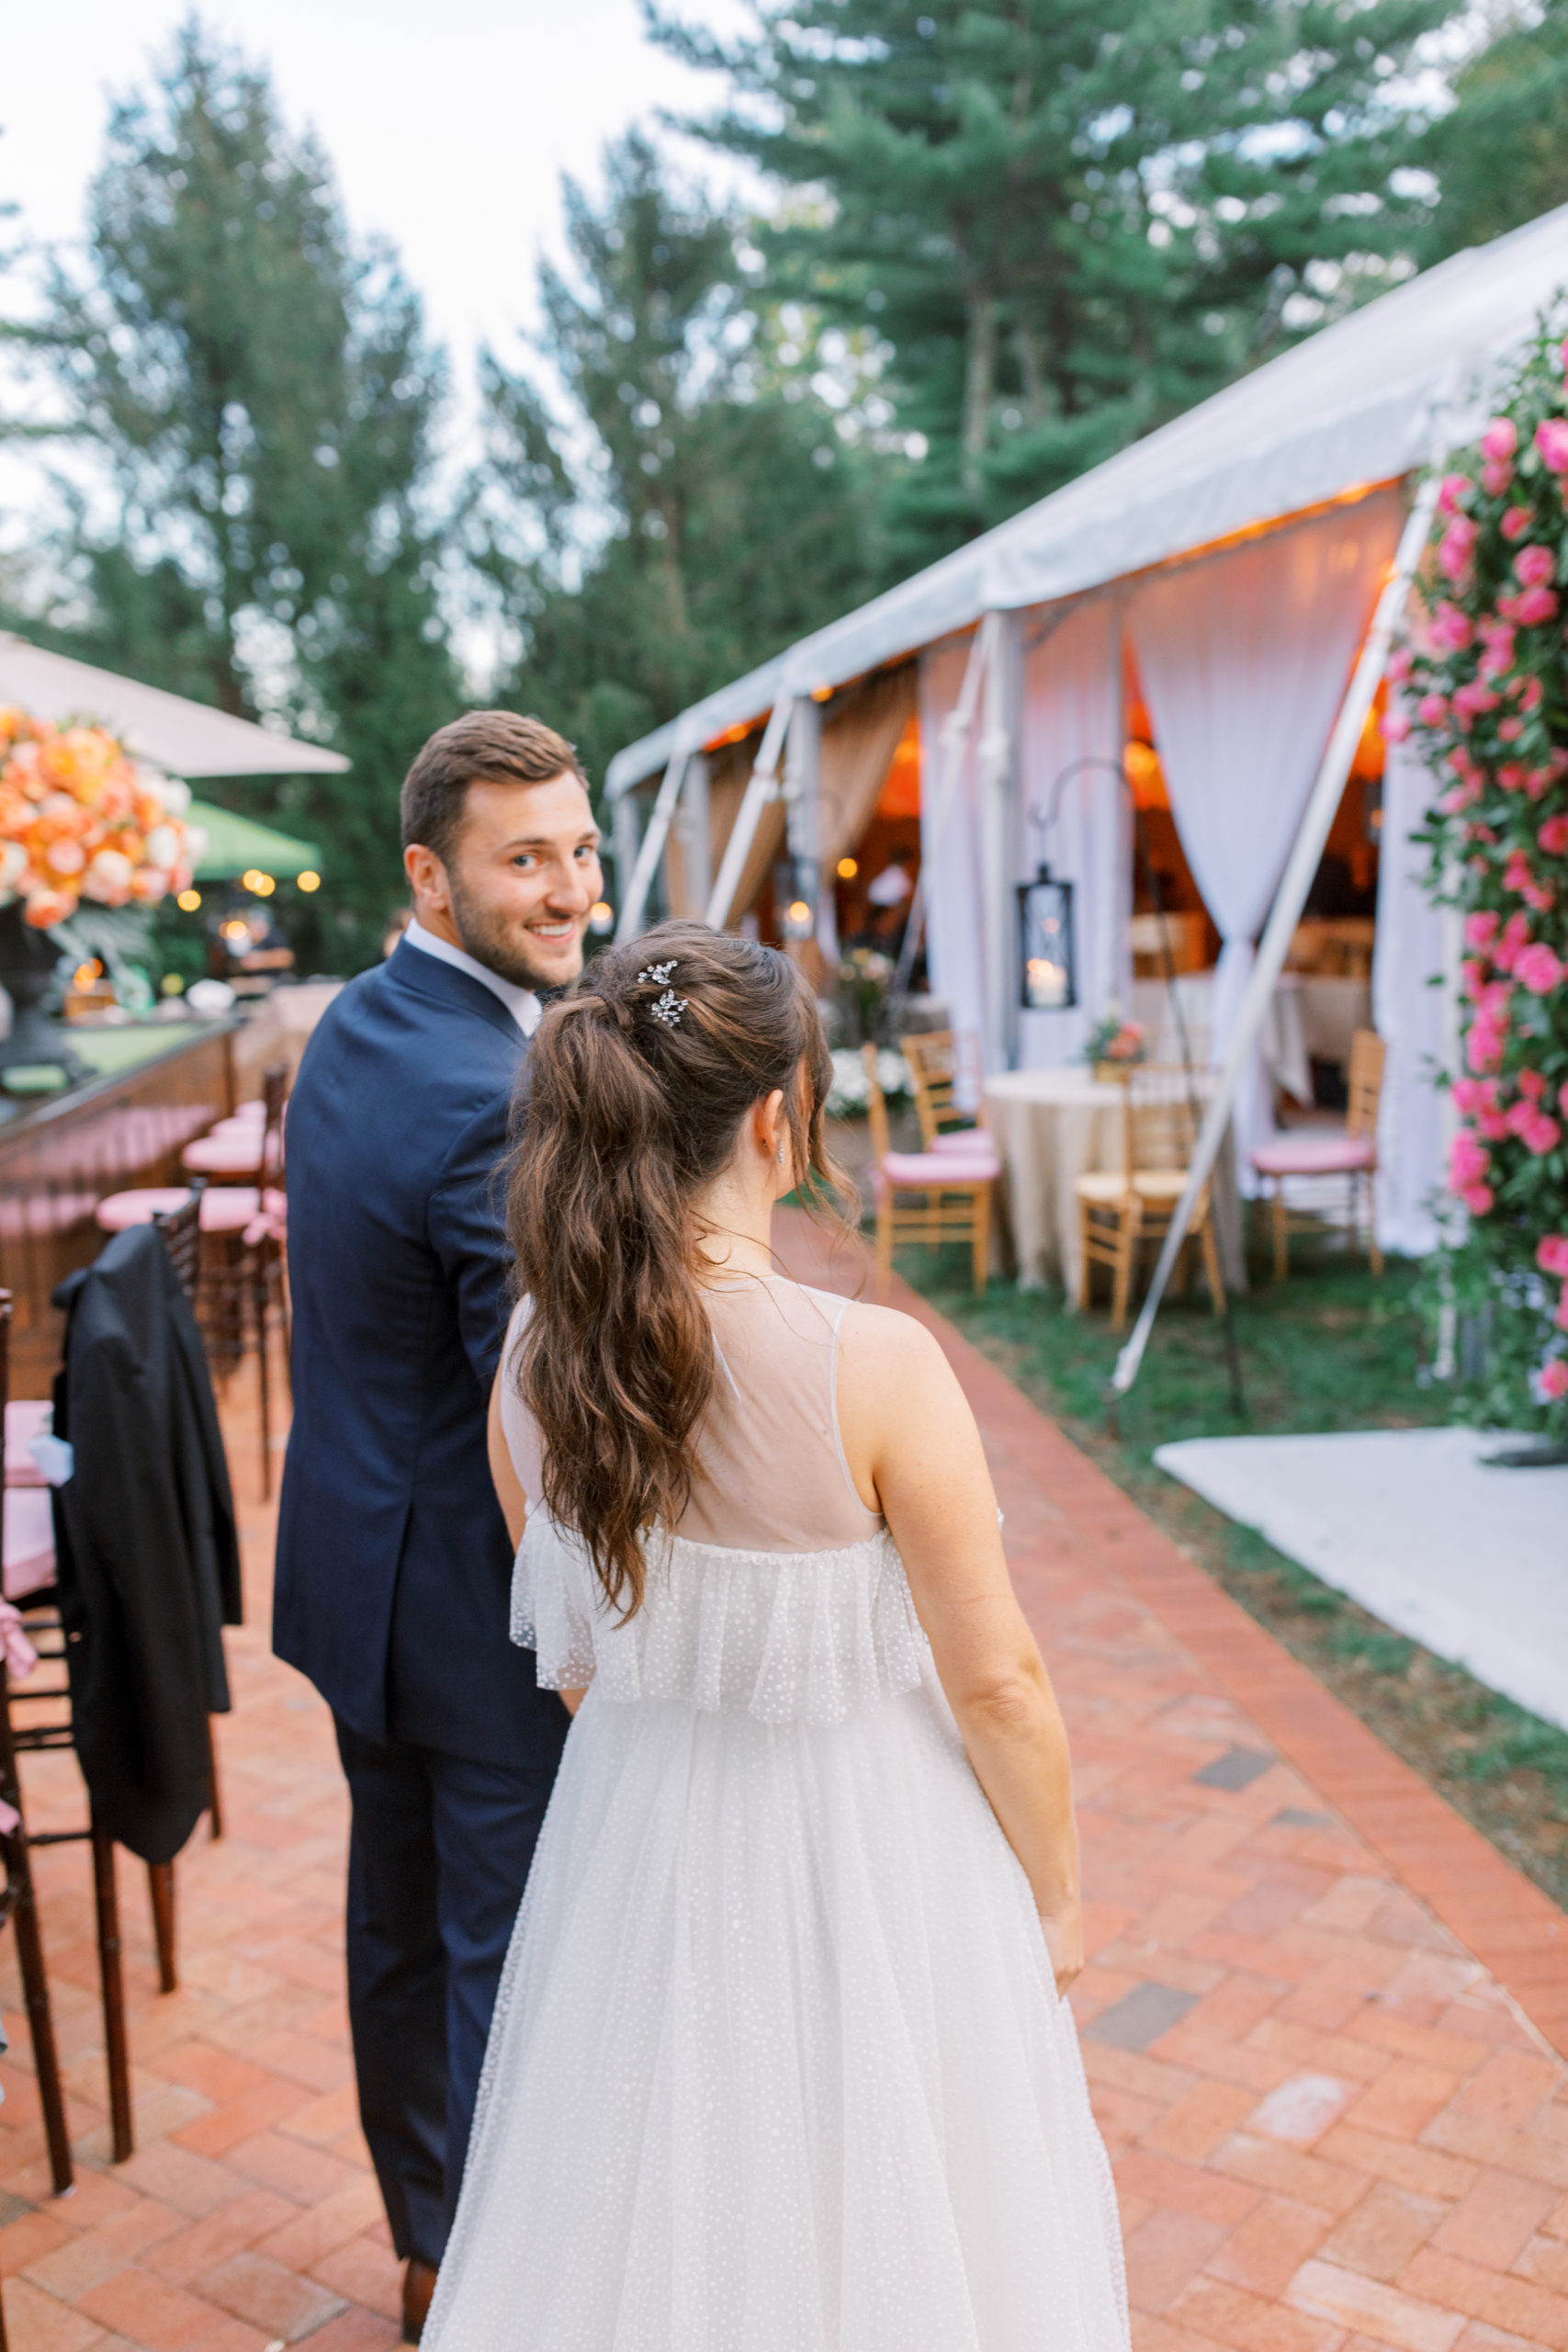 groom smiles back as he and bride wait to enter reception tent amid roses and trees NJ Private Estate Wedding Photography